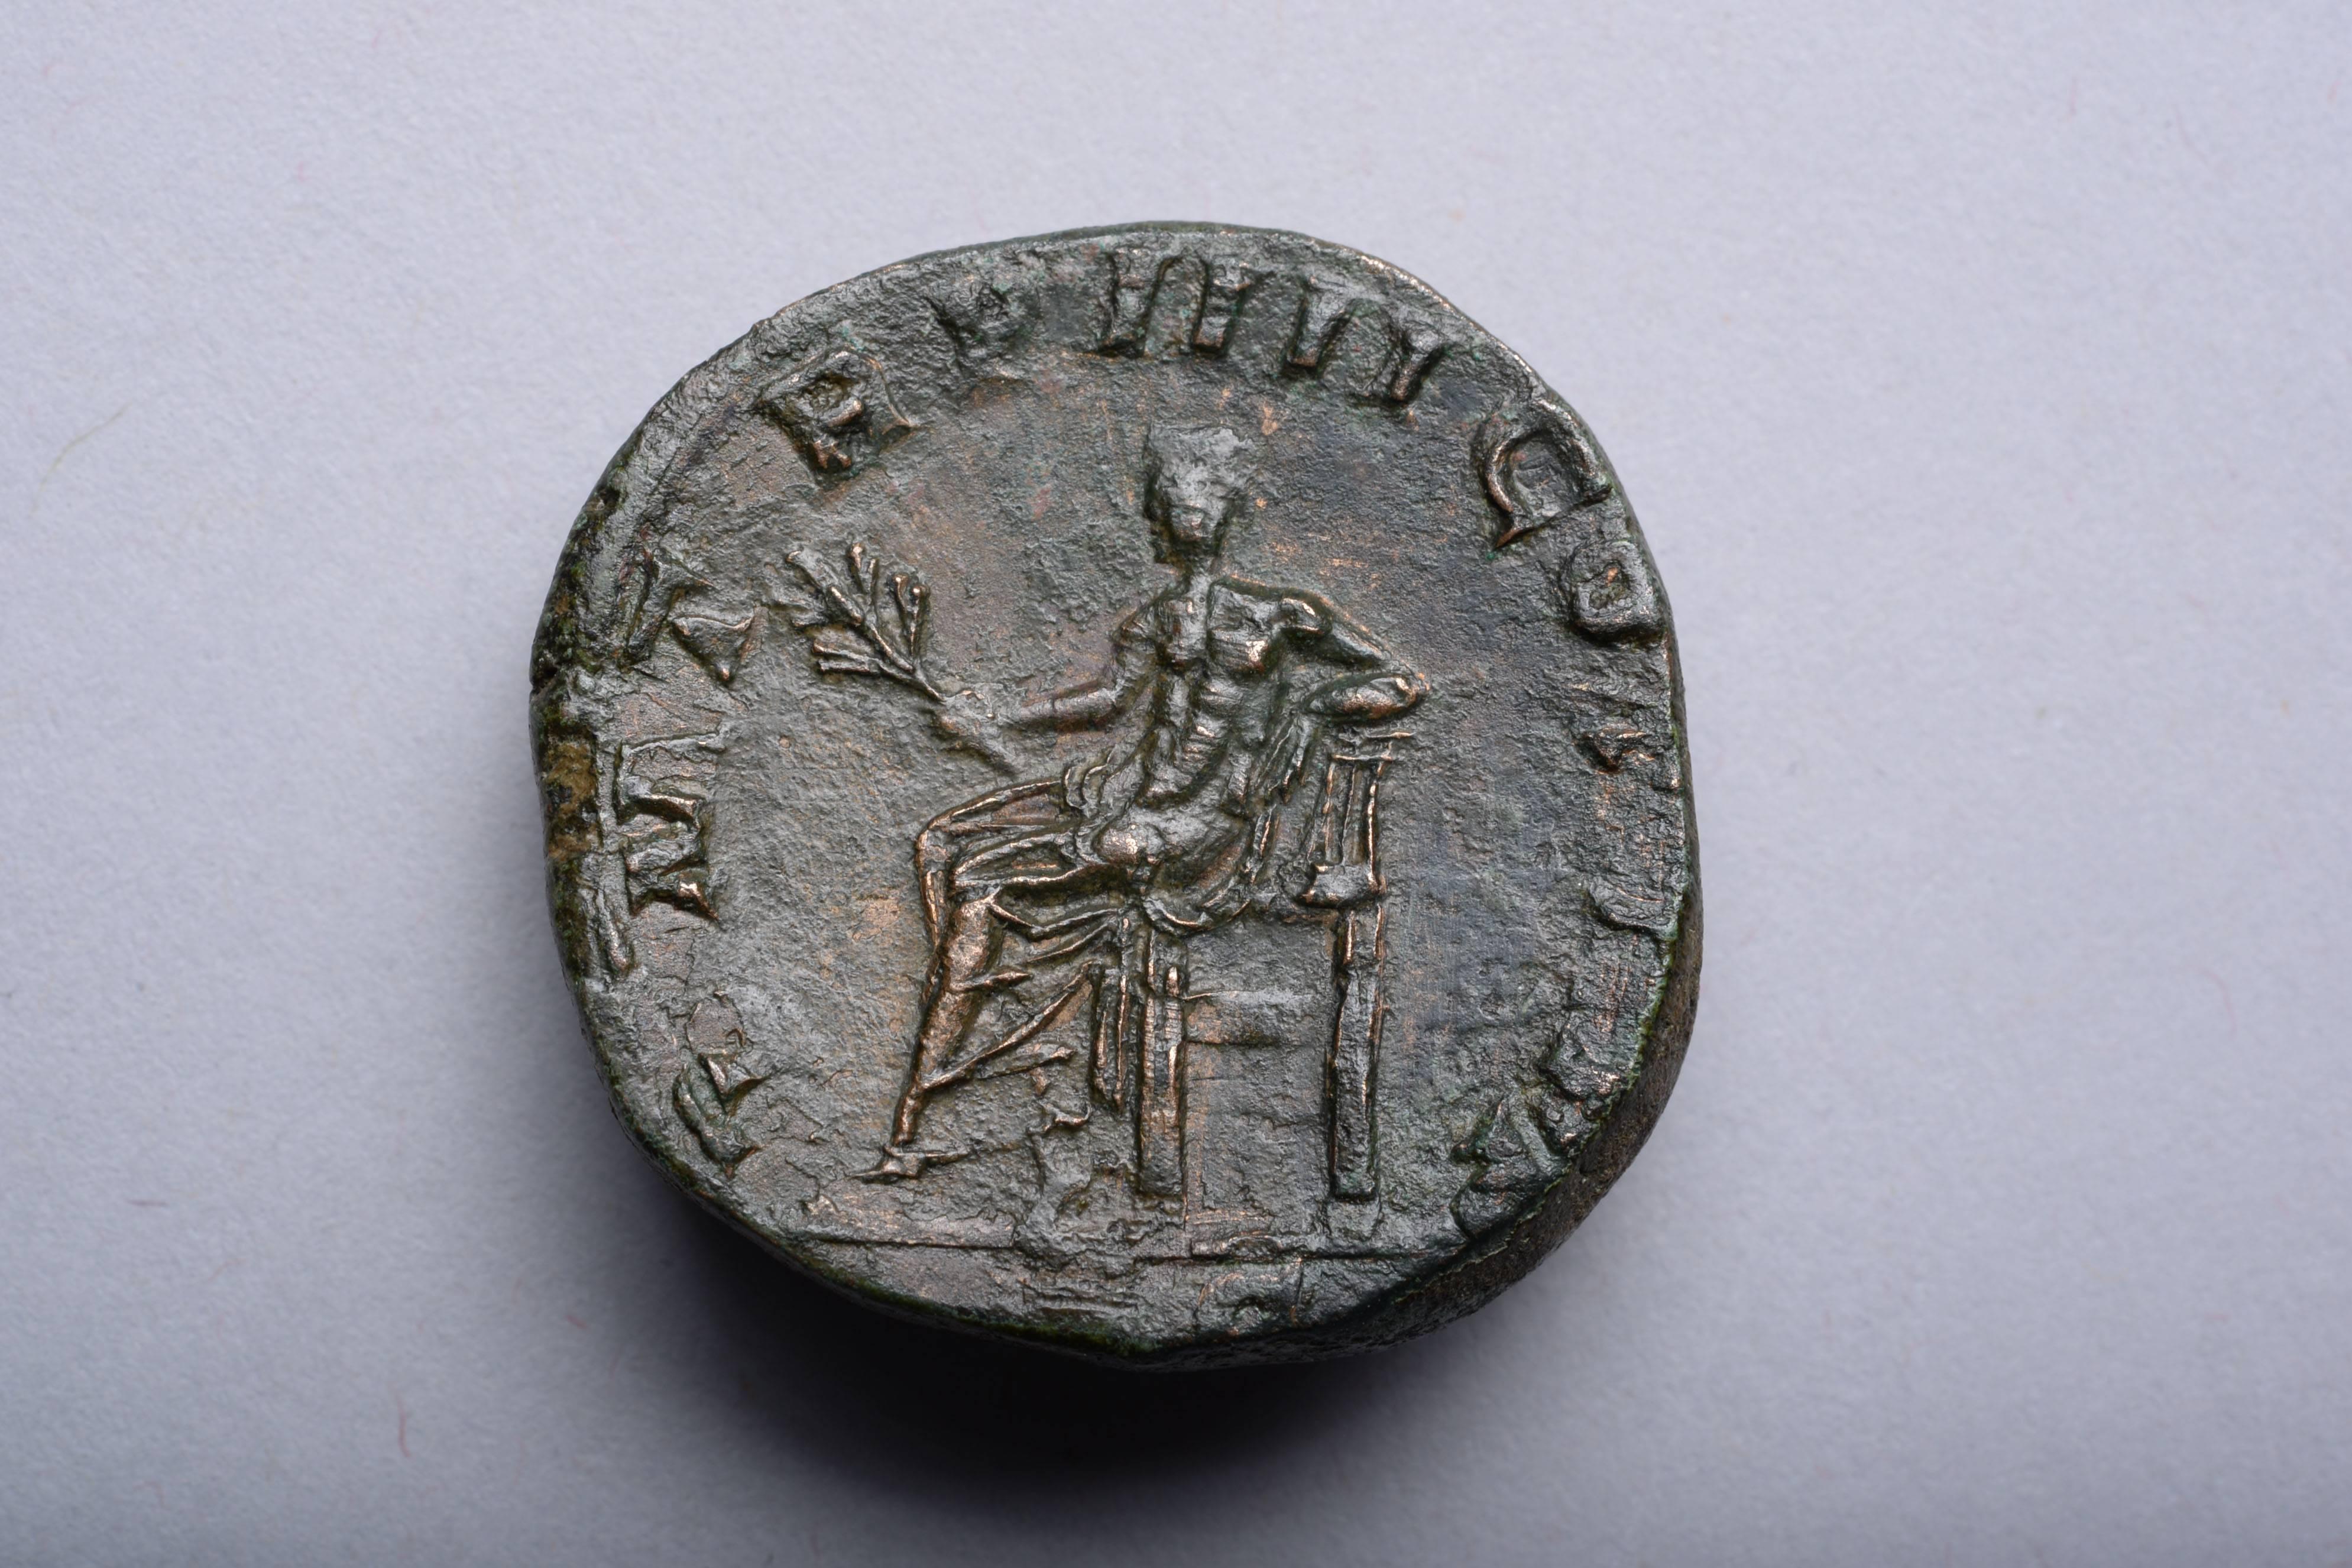 A sestertius minted under the youngest ever sole ruler of the Roman Empire, Emperor Gordian III (Marcus Antonius Gordianus). Struck at the Rome mint, in 241 AD.

The obverse with a sensitively rendered portrait of the teenage ruler. Gordian is